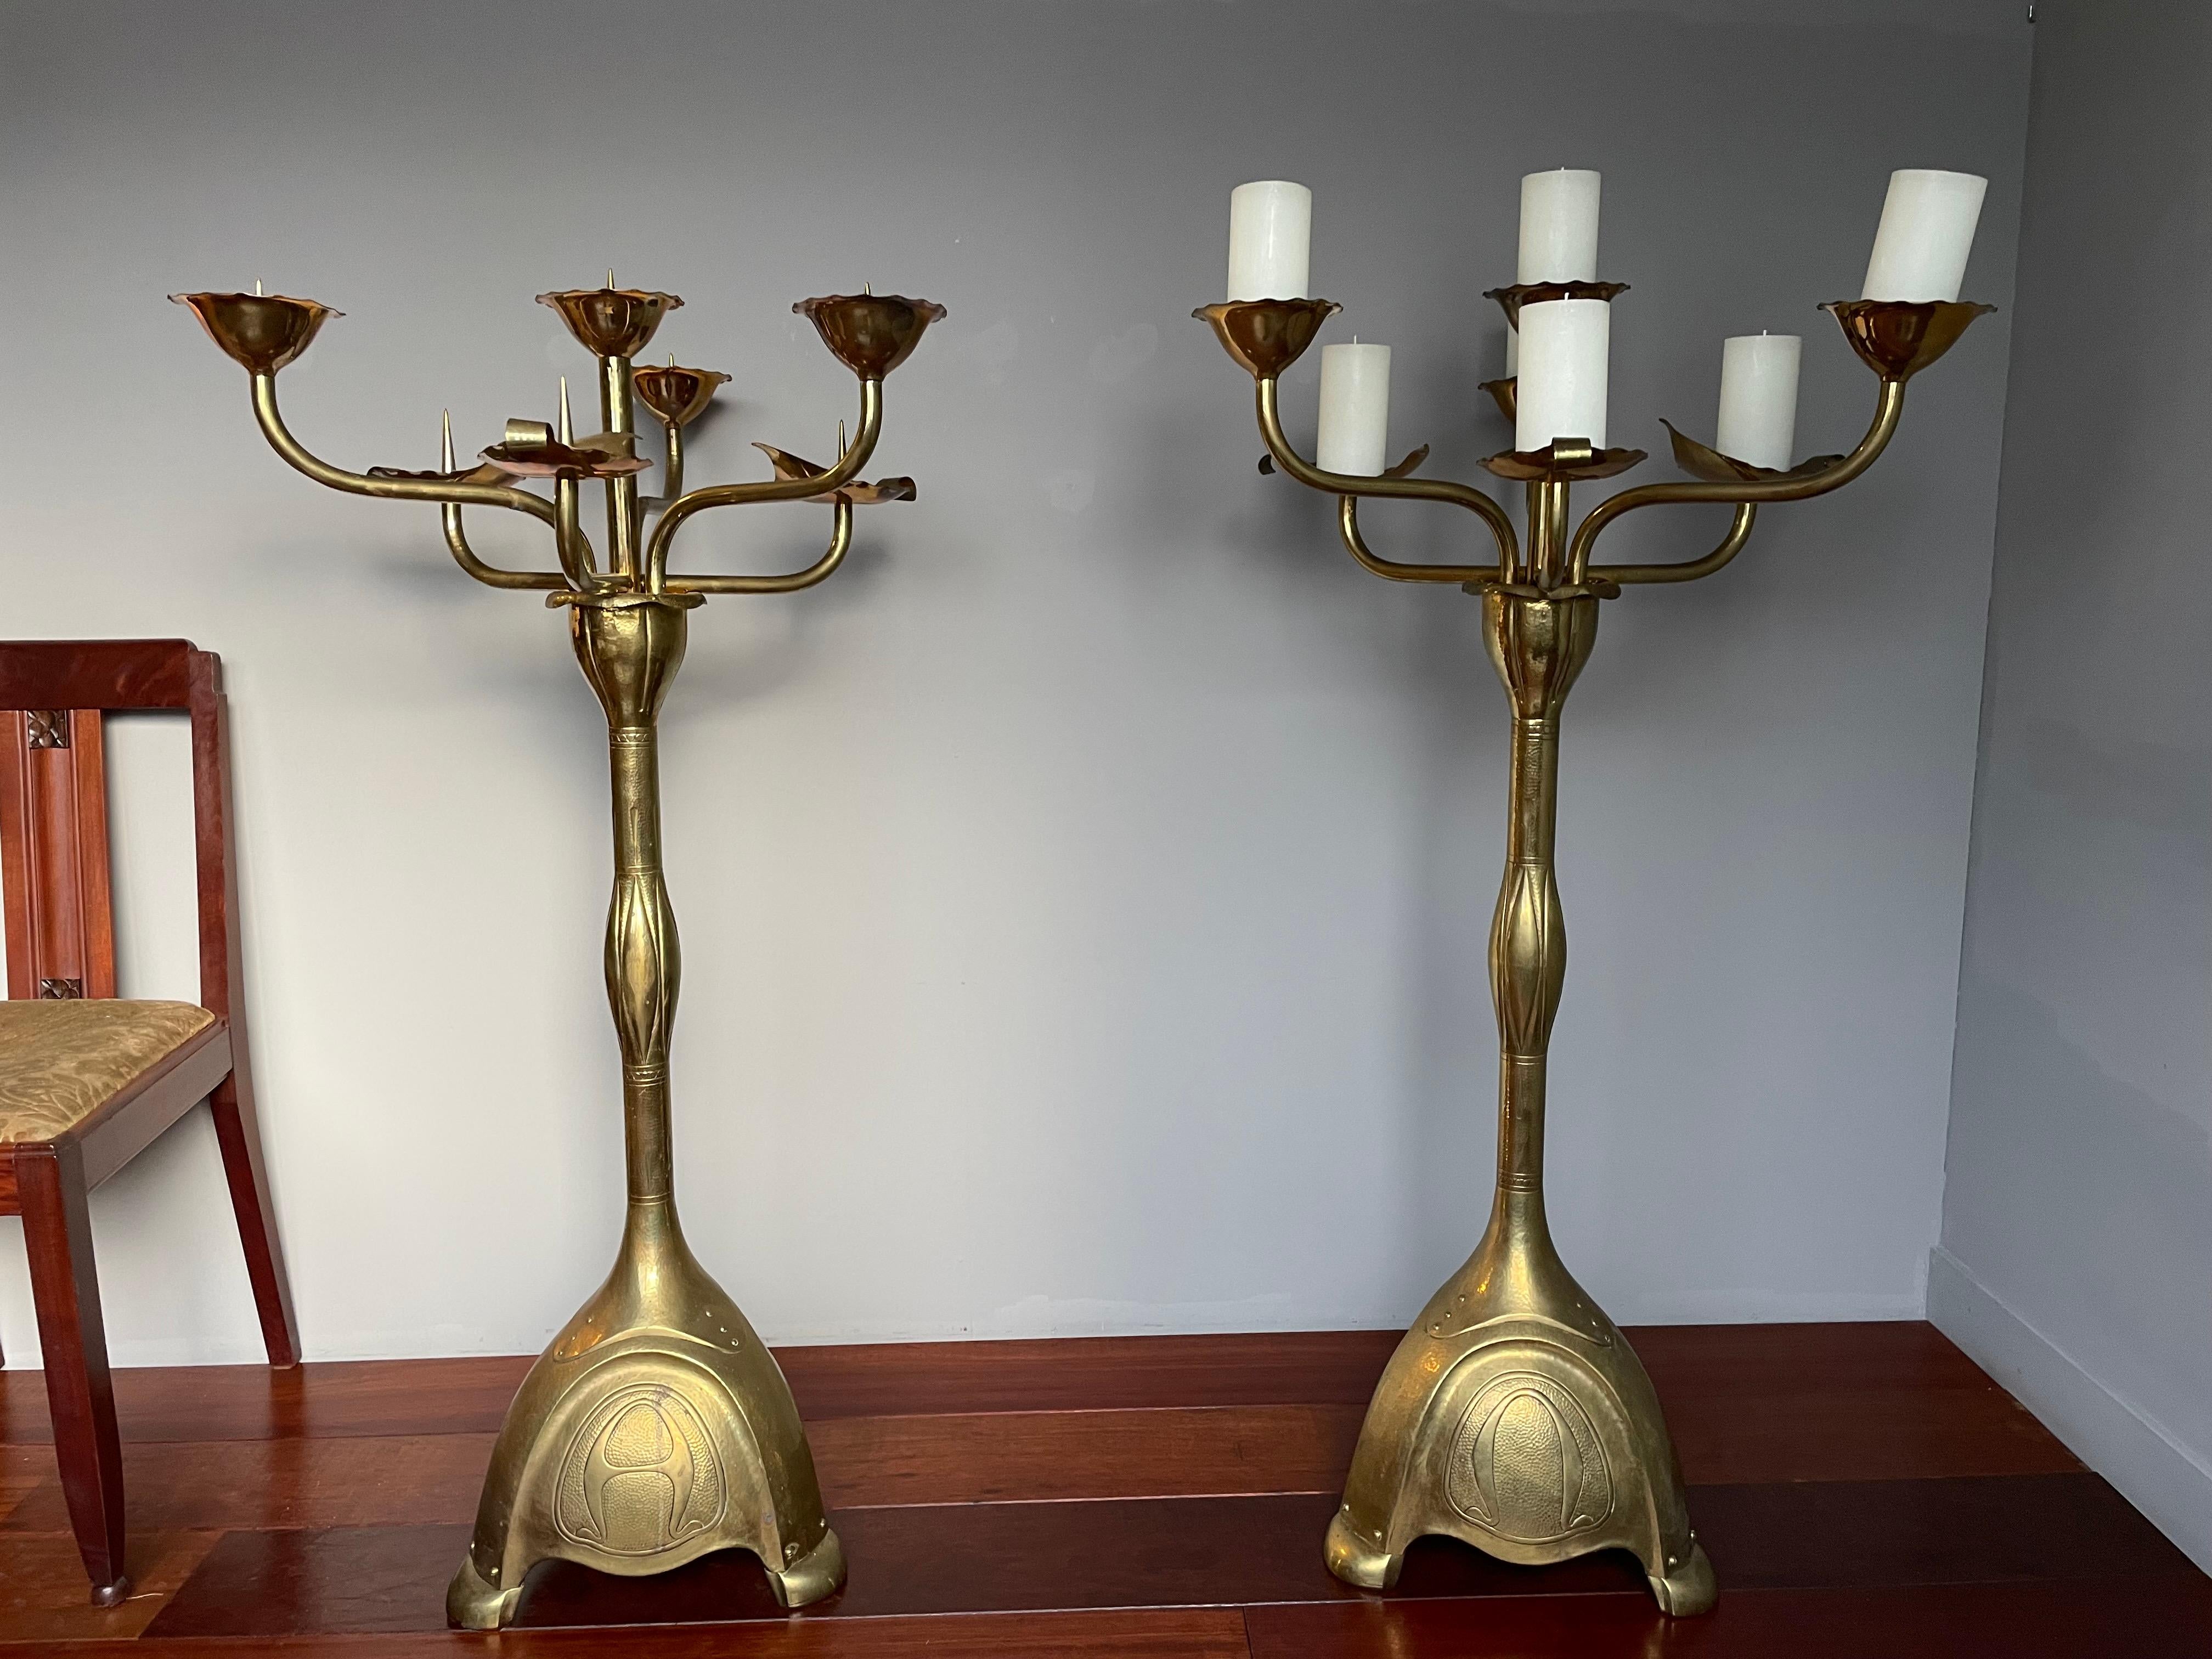 20th Century Largest Pair of Arts and Crafts Floor Candle Holders / Alpha & Omega Candelabras For Sale